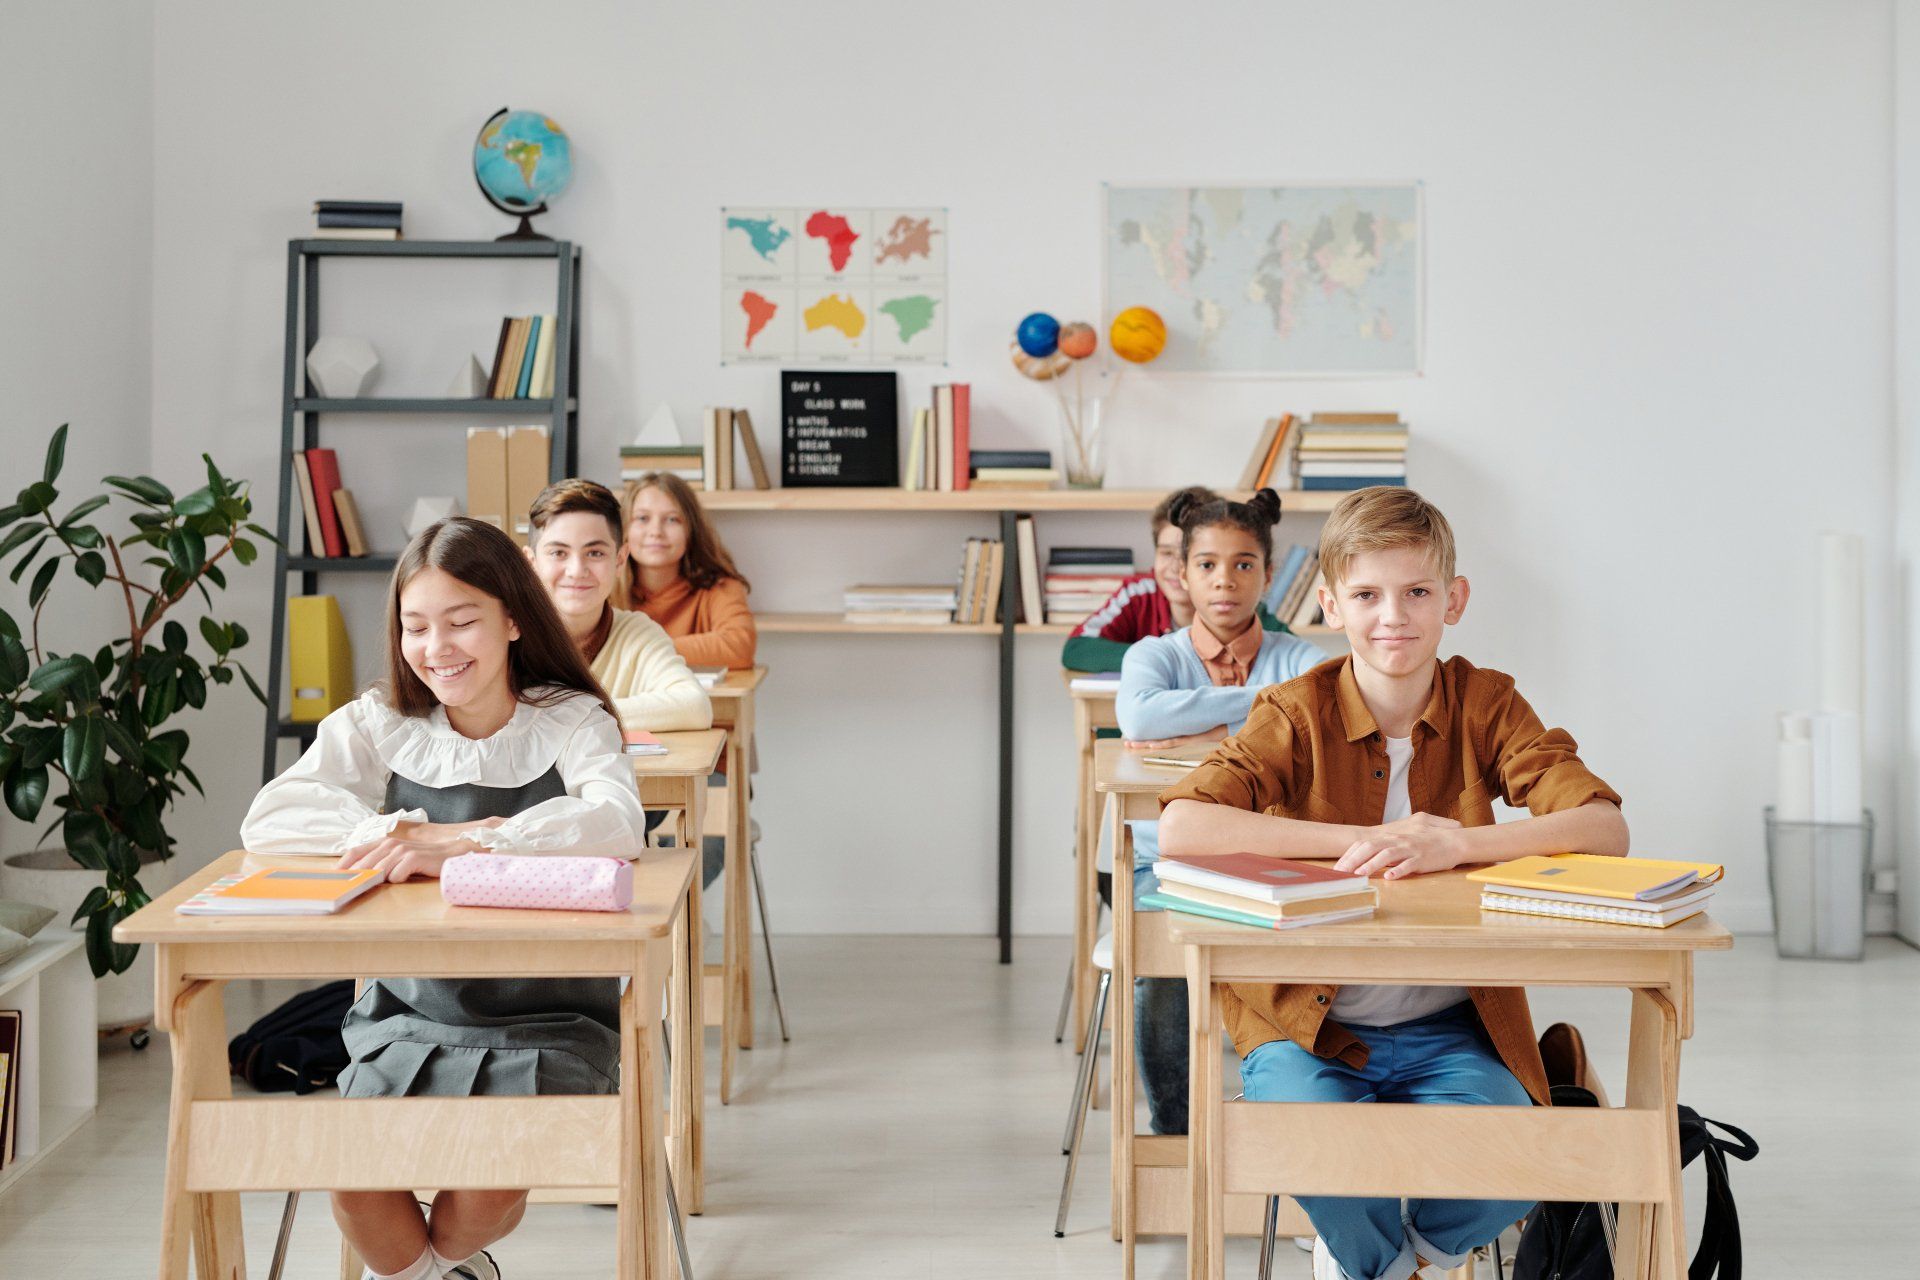 Kids sitting at desks in a classroom